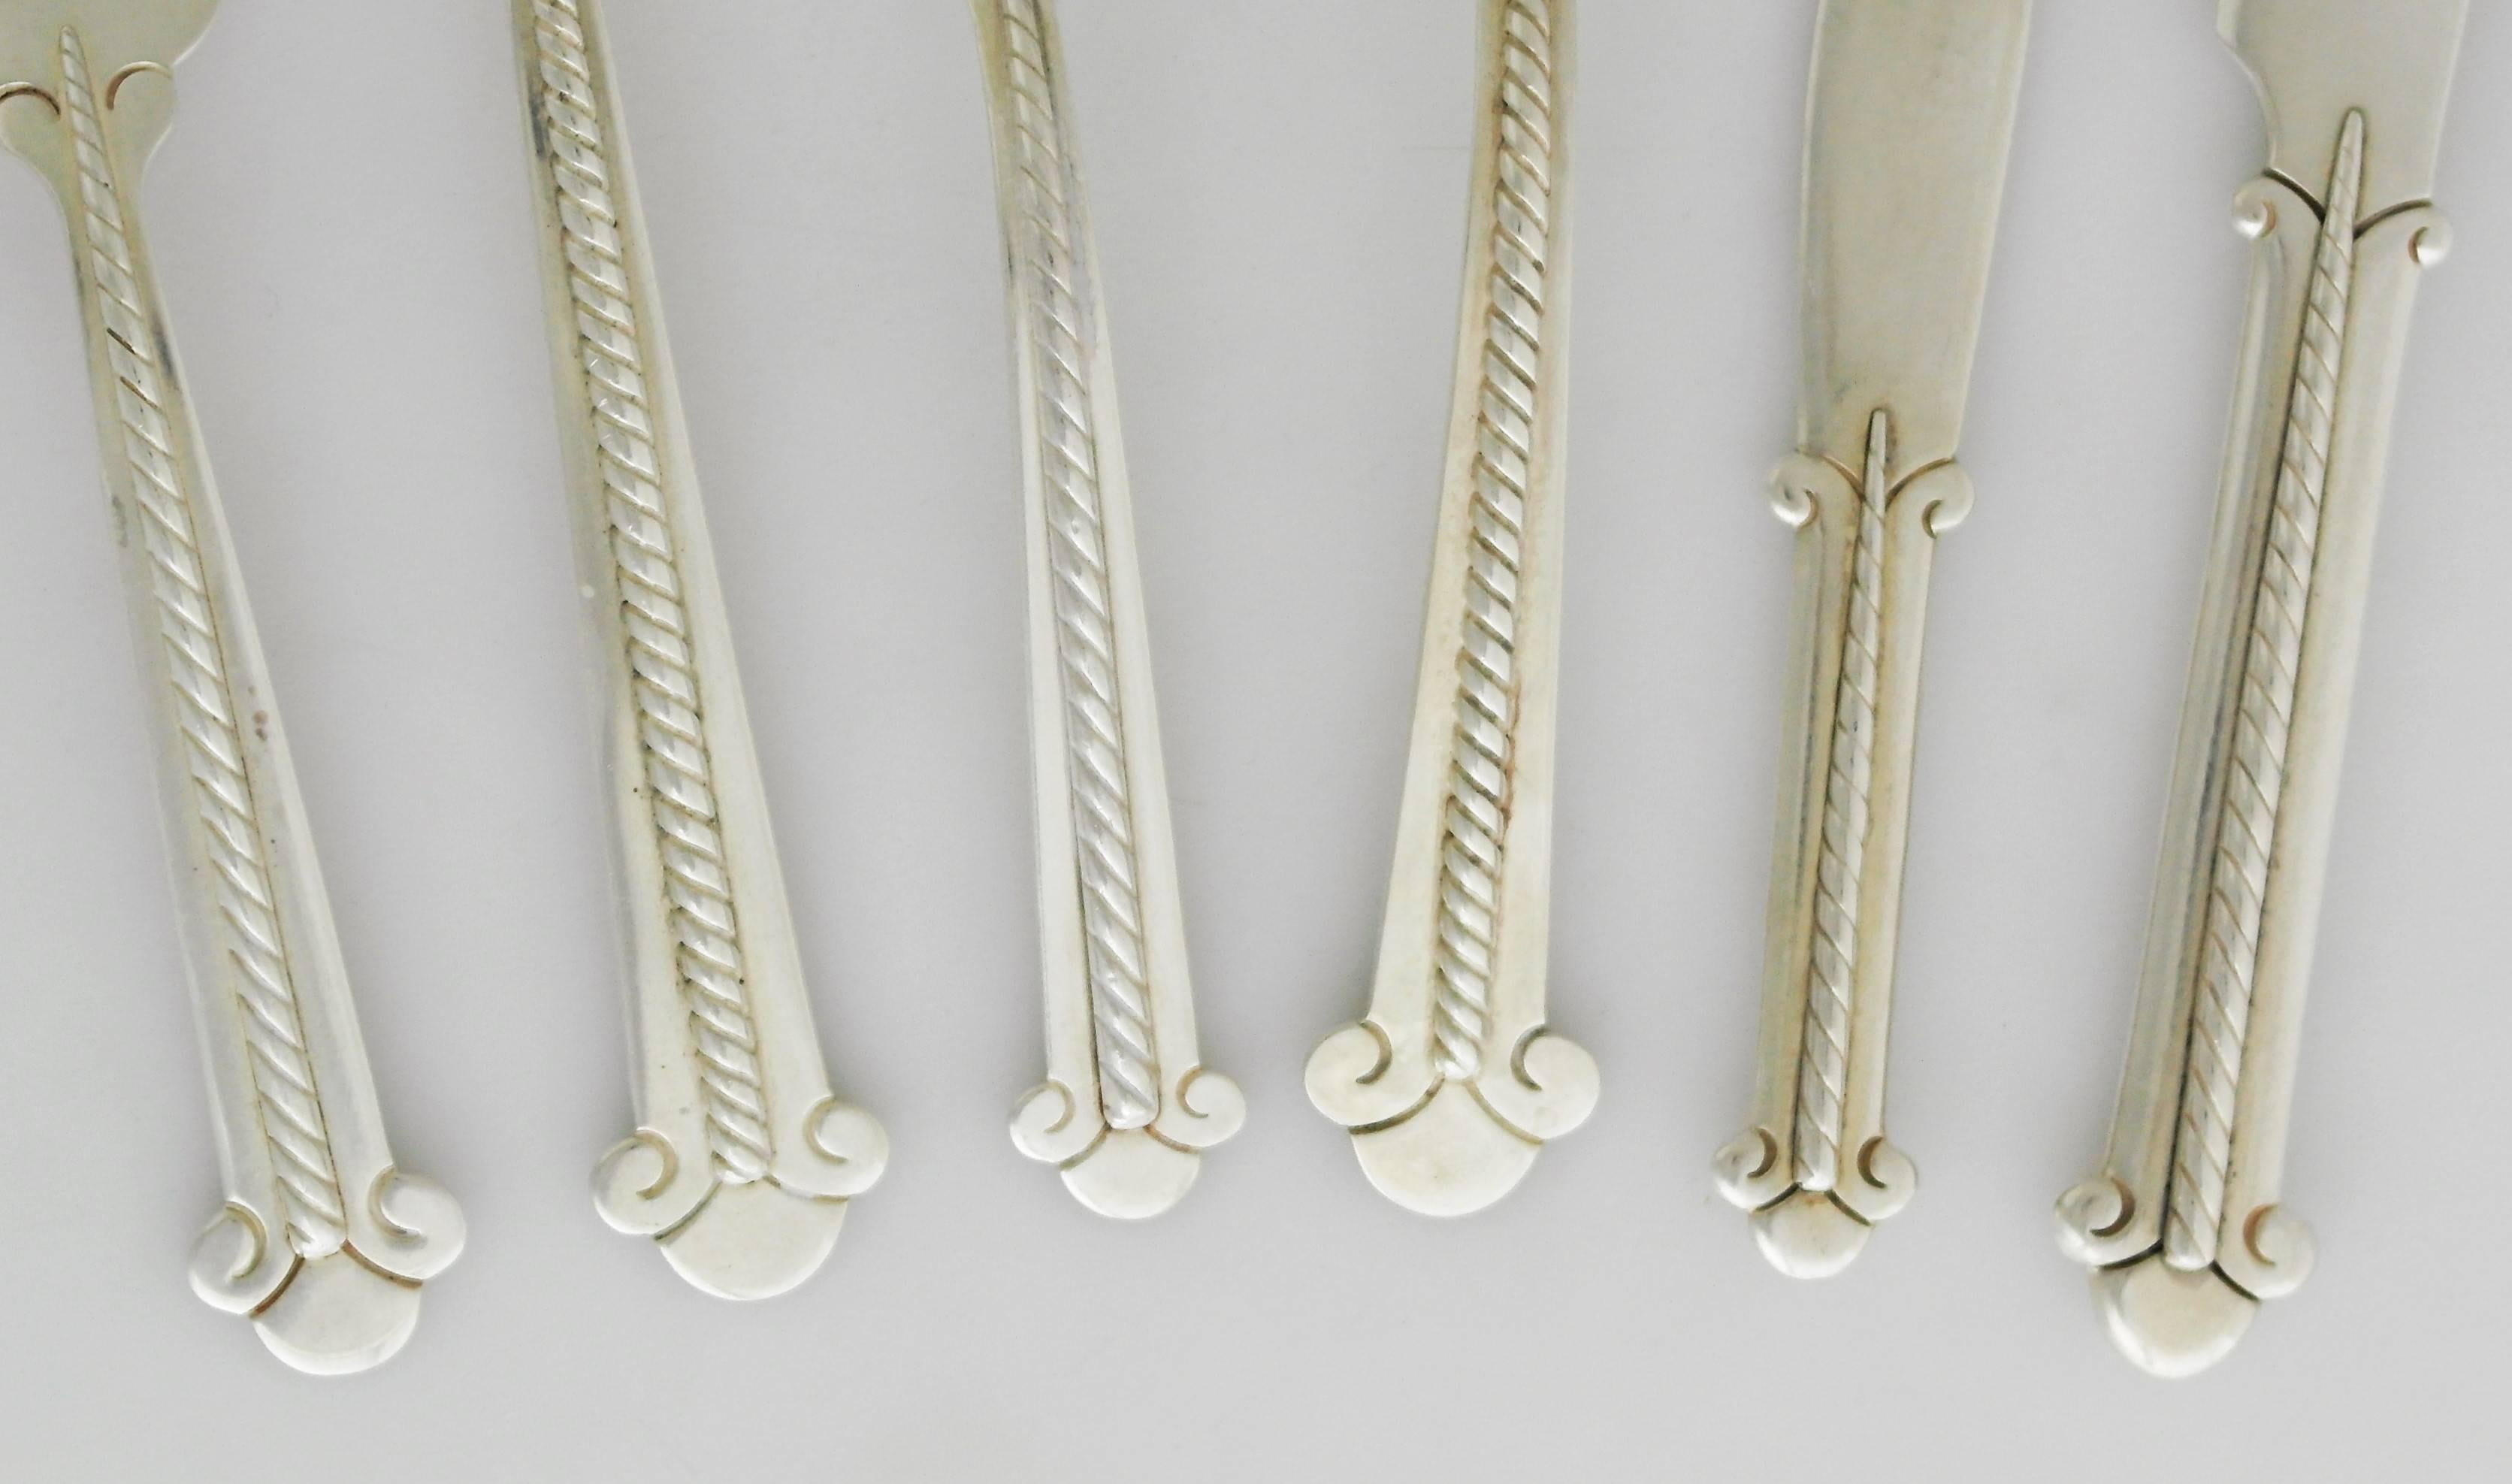 Being offered is an exceedingly rare set of circa 1948-1962 sterling silver flatware by Hector Aguilar, Taxco, Mexico in the rare 'rope' pattern. The set has eight (8) place settings, 6 different pieces per place setting -- please see list below --